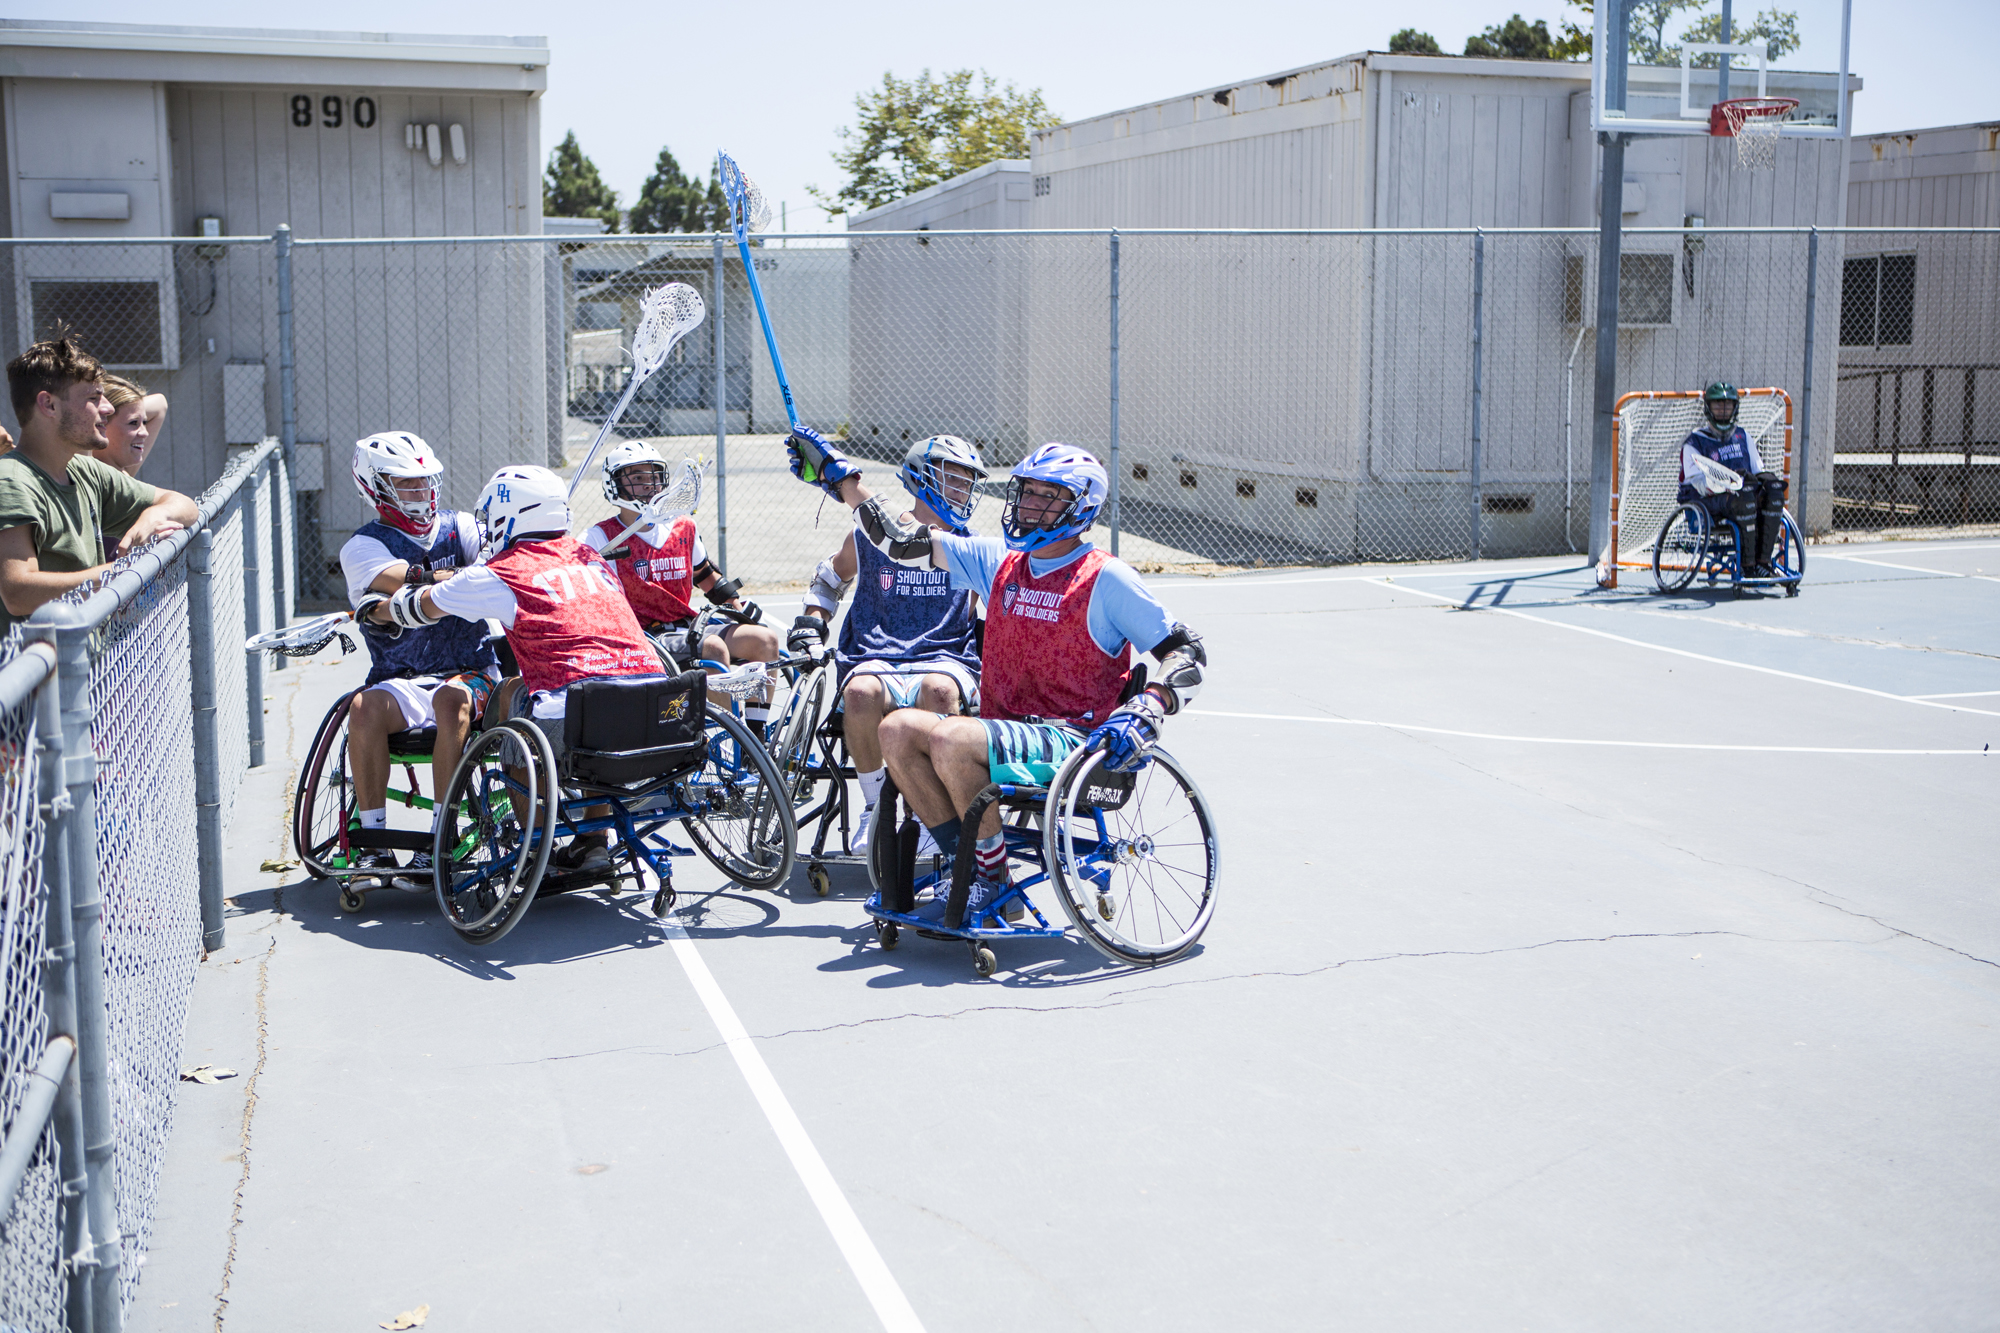 High School Senior has “newfound respect,” after playing wheelchair lacrosse with Veterans